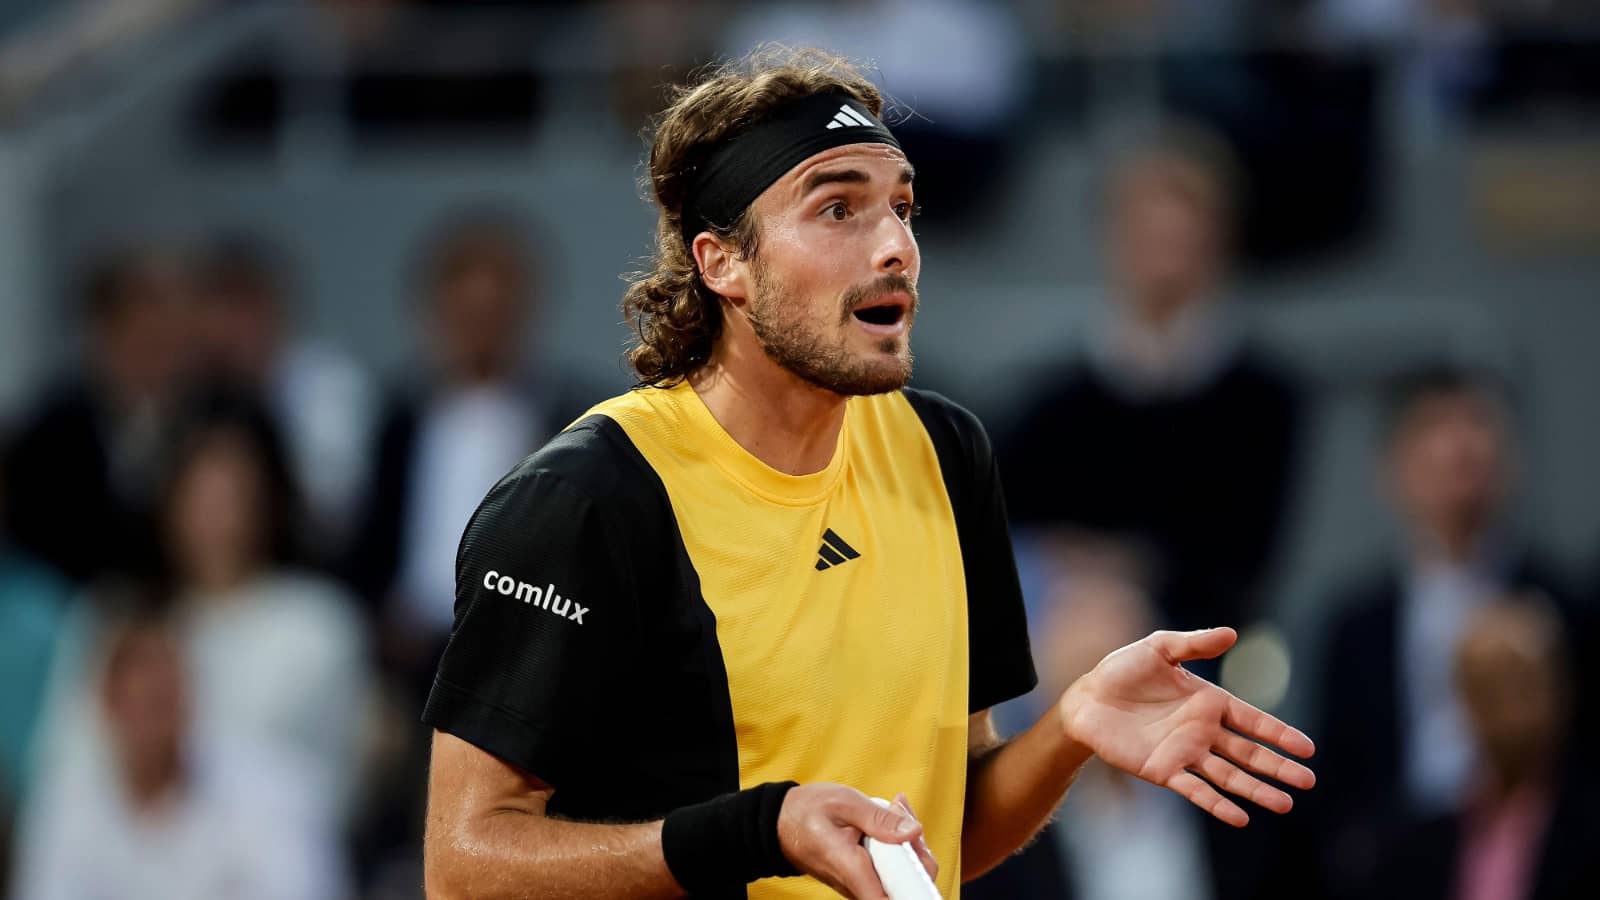 BREAKING NEWS ; Stefanos Tsitsipas’s former coach Mark Philippoussis has announced his returned after so many years.. see more….